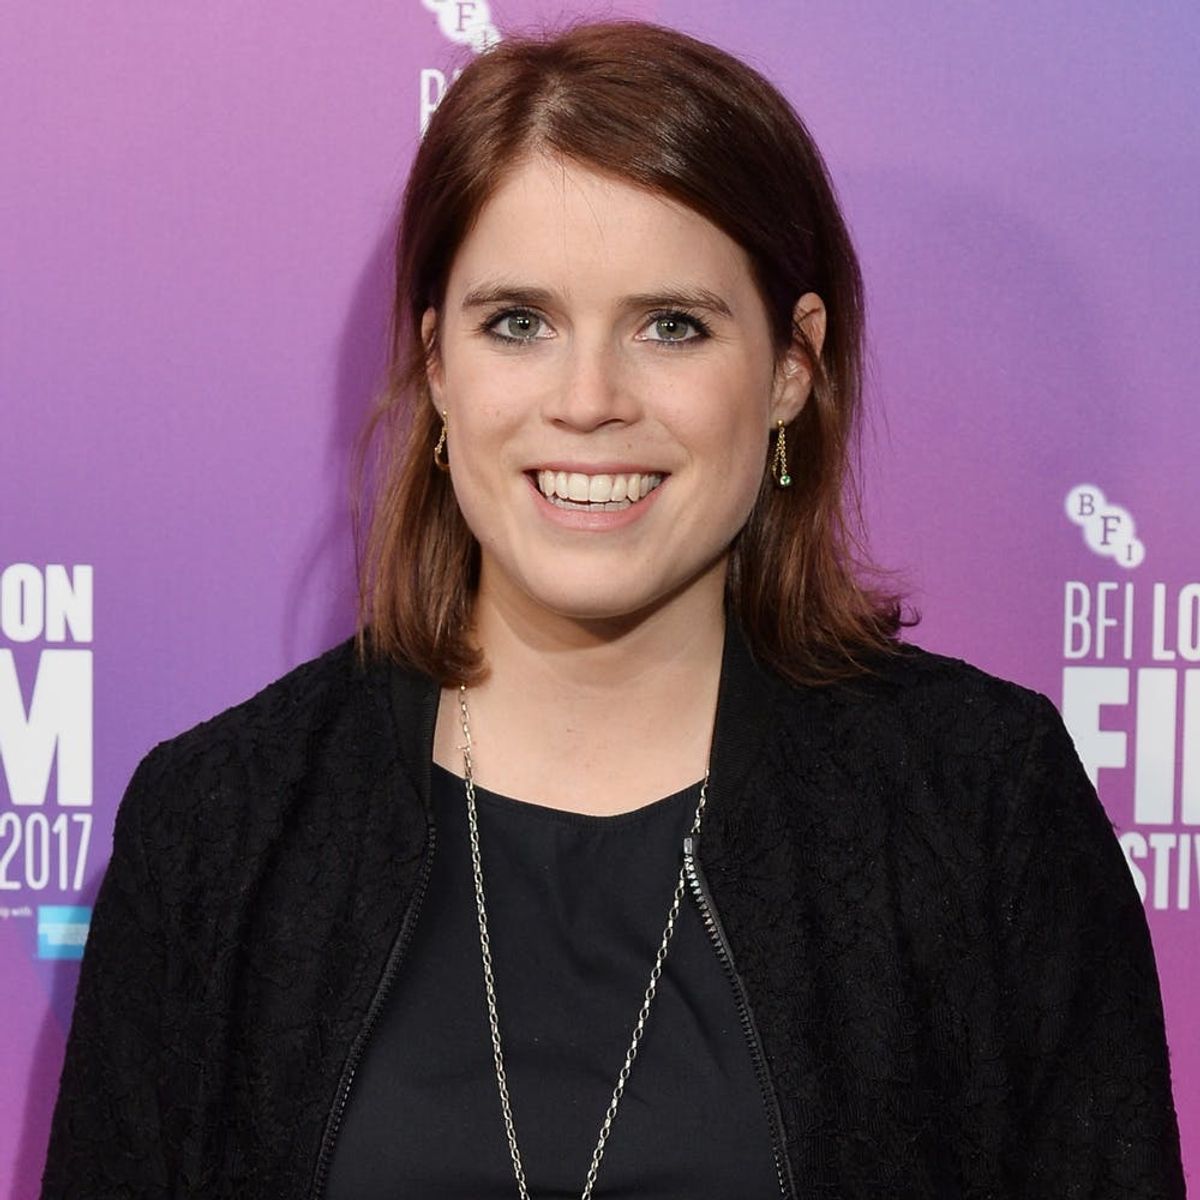 Princess Eugenie Just Became the First Young British Royal to Create a Personal Instagram Account